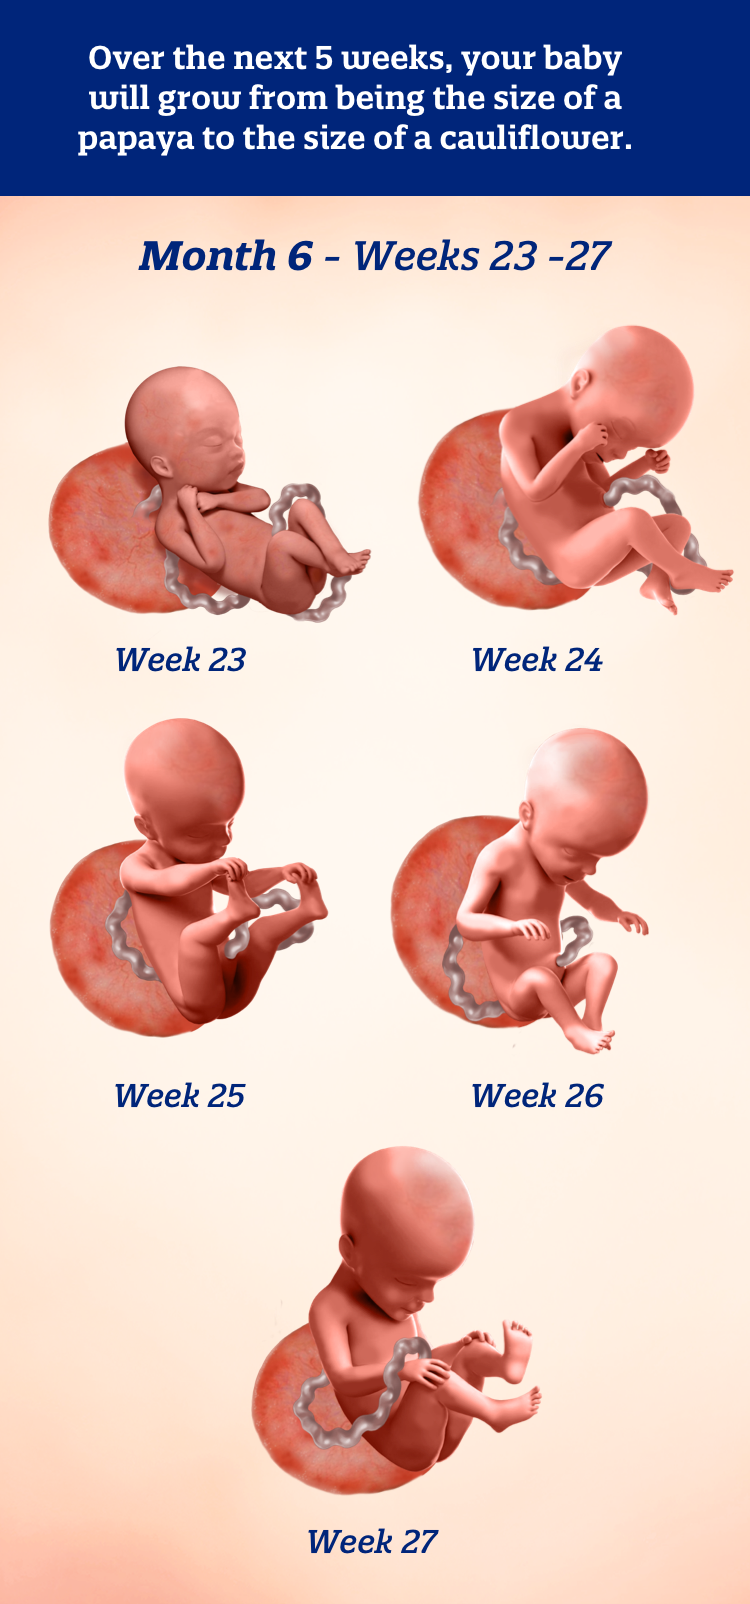 Month 6 weeks 23-27: Over the next 5 weeks your baby will grow from being the size of a papaya to the size of a cauliflower.